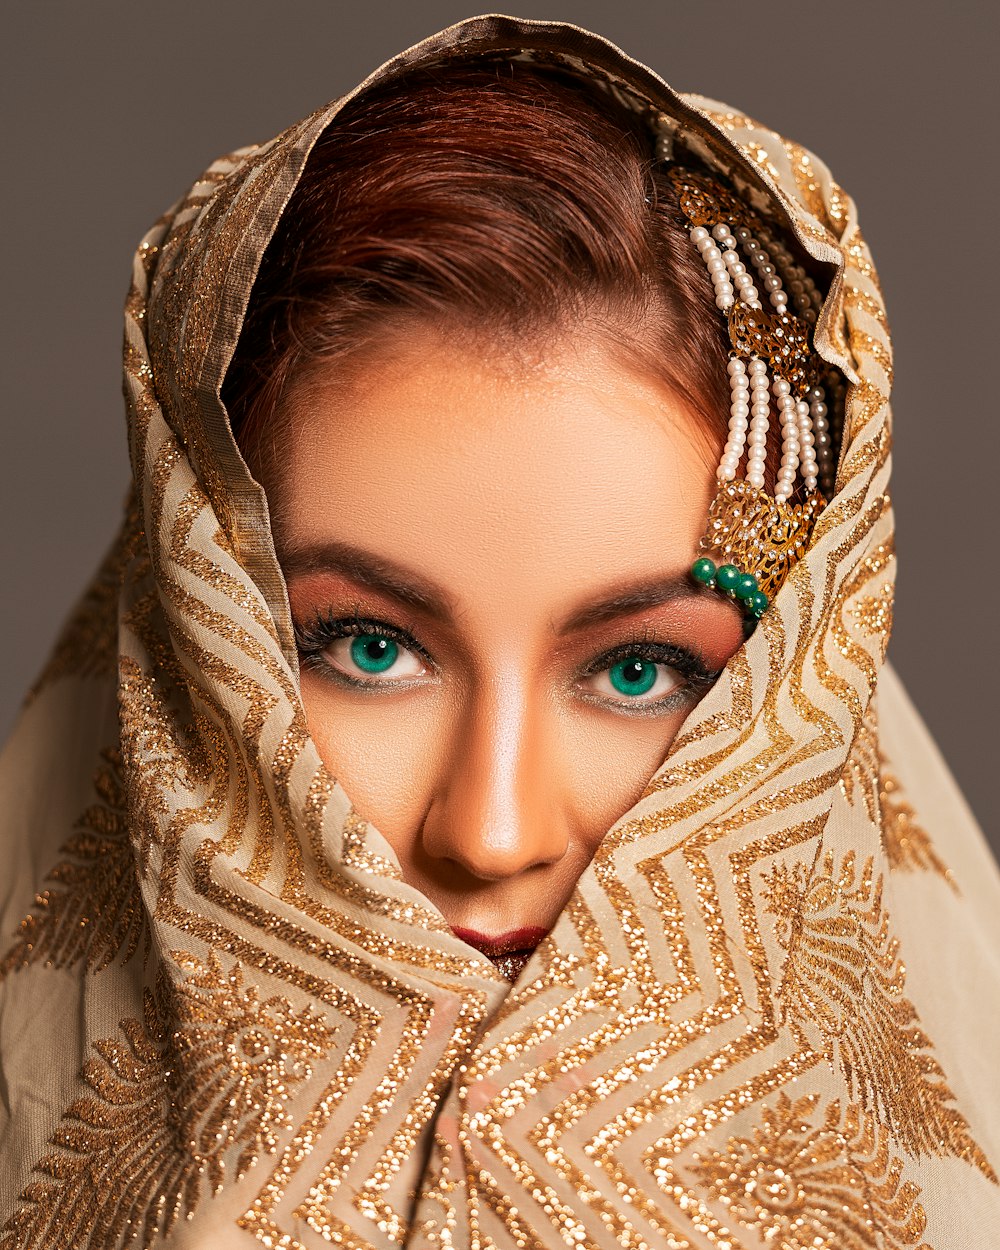 woman in brown and white hijab